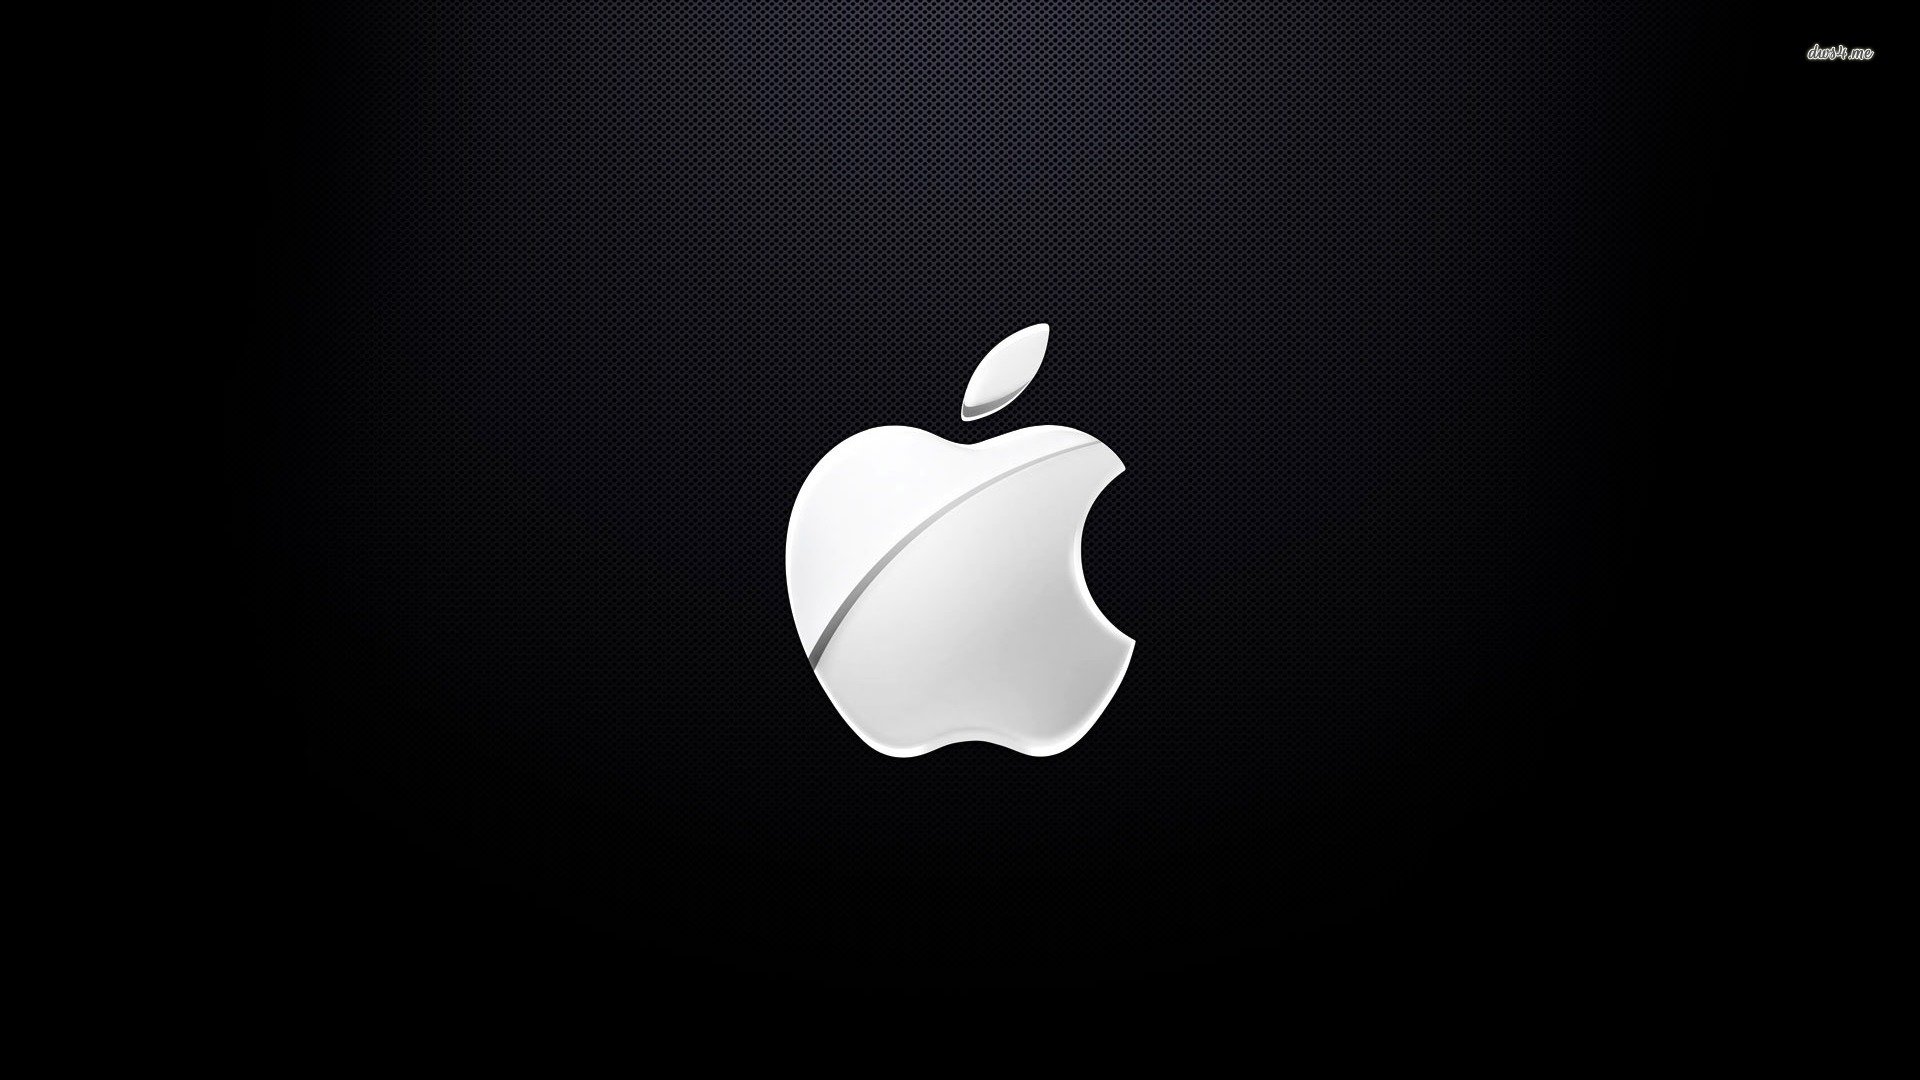 Apple Logo Pictures Black and White HD Wallpaper Apple Logo Pictures